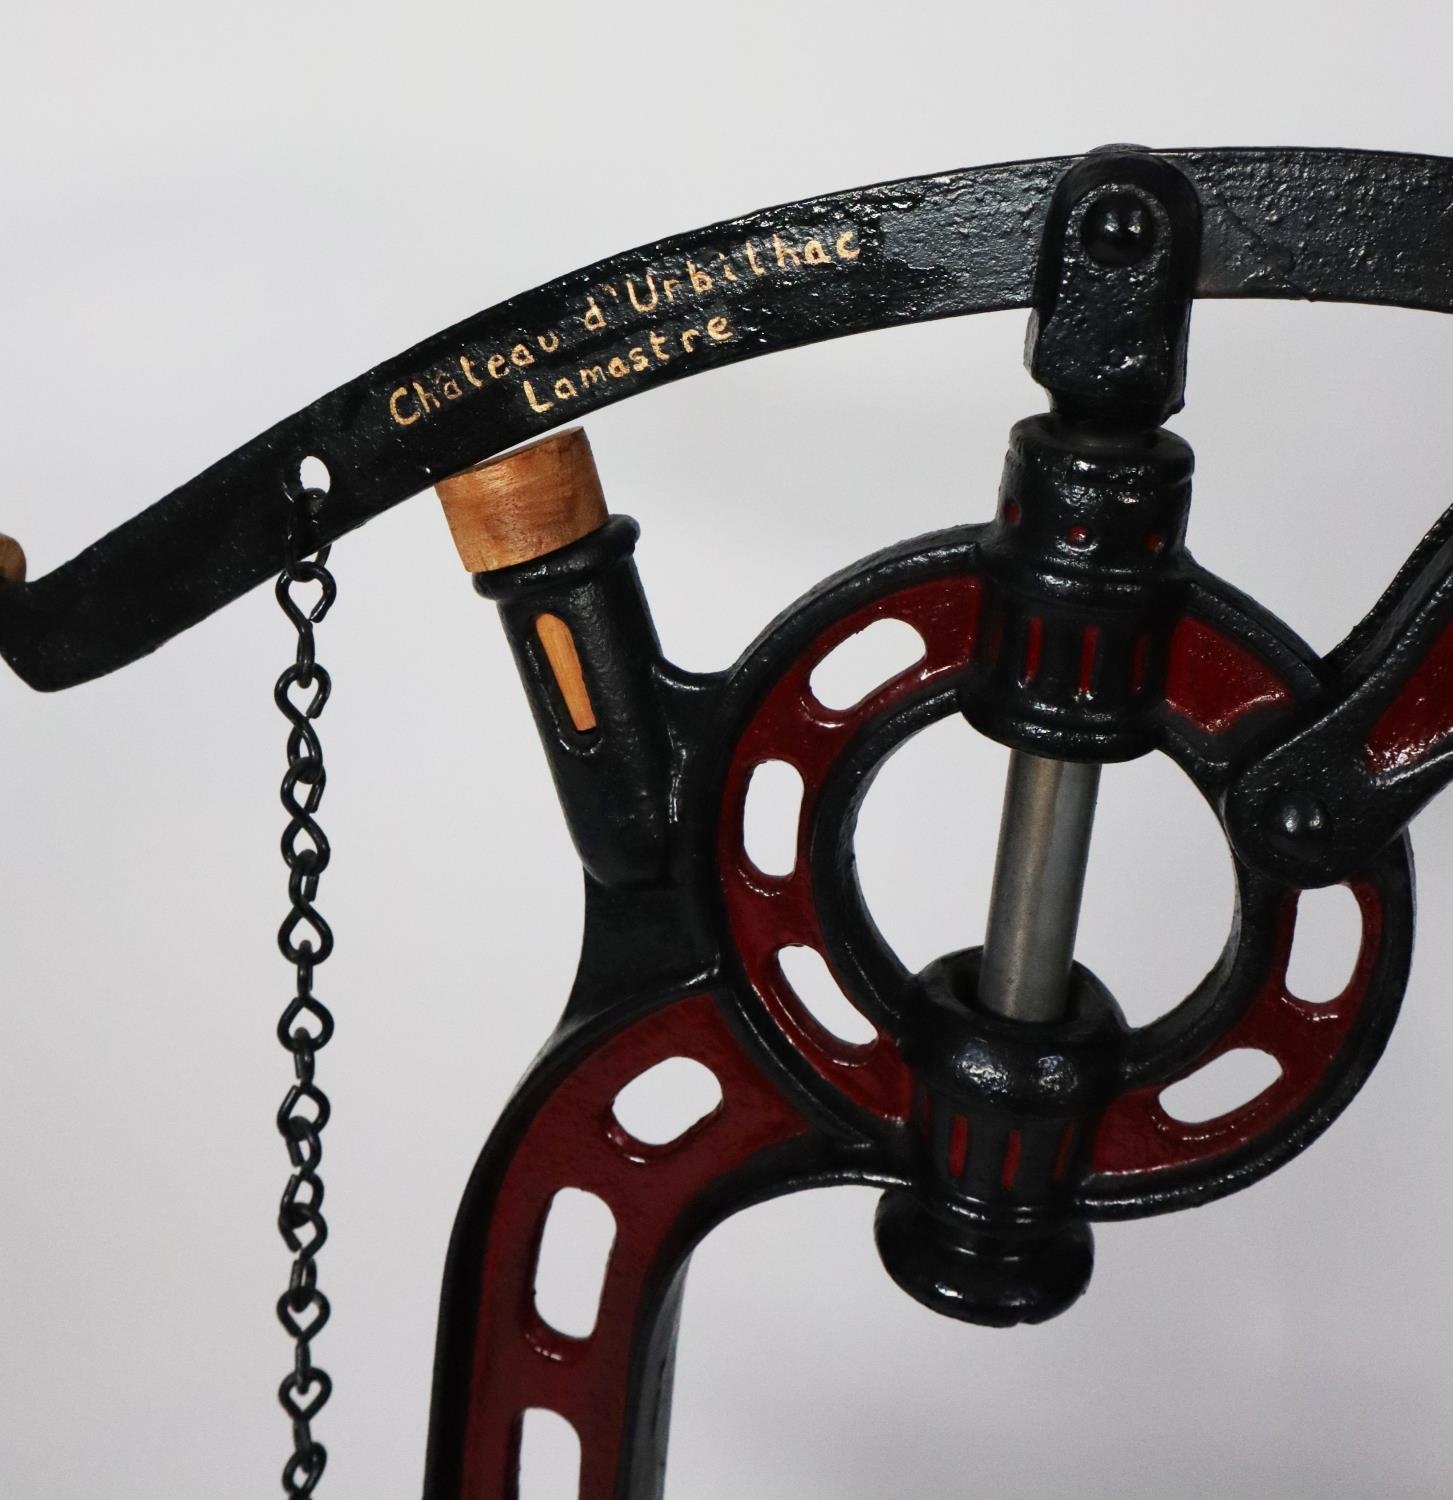 ‘CHARLES PINEL, FONDERIE DE MAROMME’ FRENCH VINTAGE MAROON AND BLACK PAINTED HAND OPERATED CAST IRON - Image 3 of 4